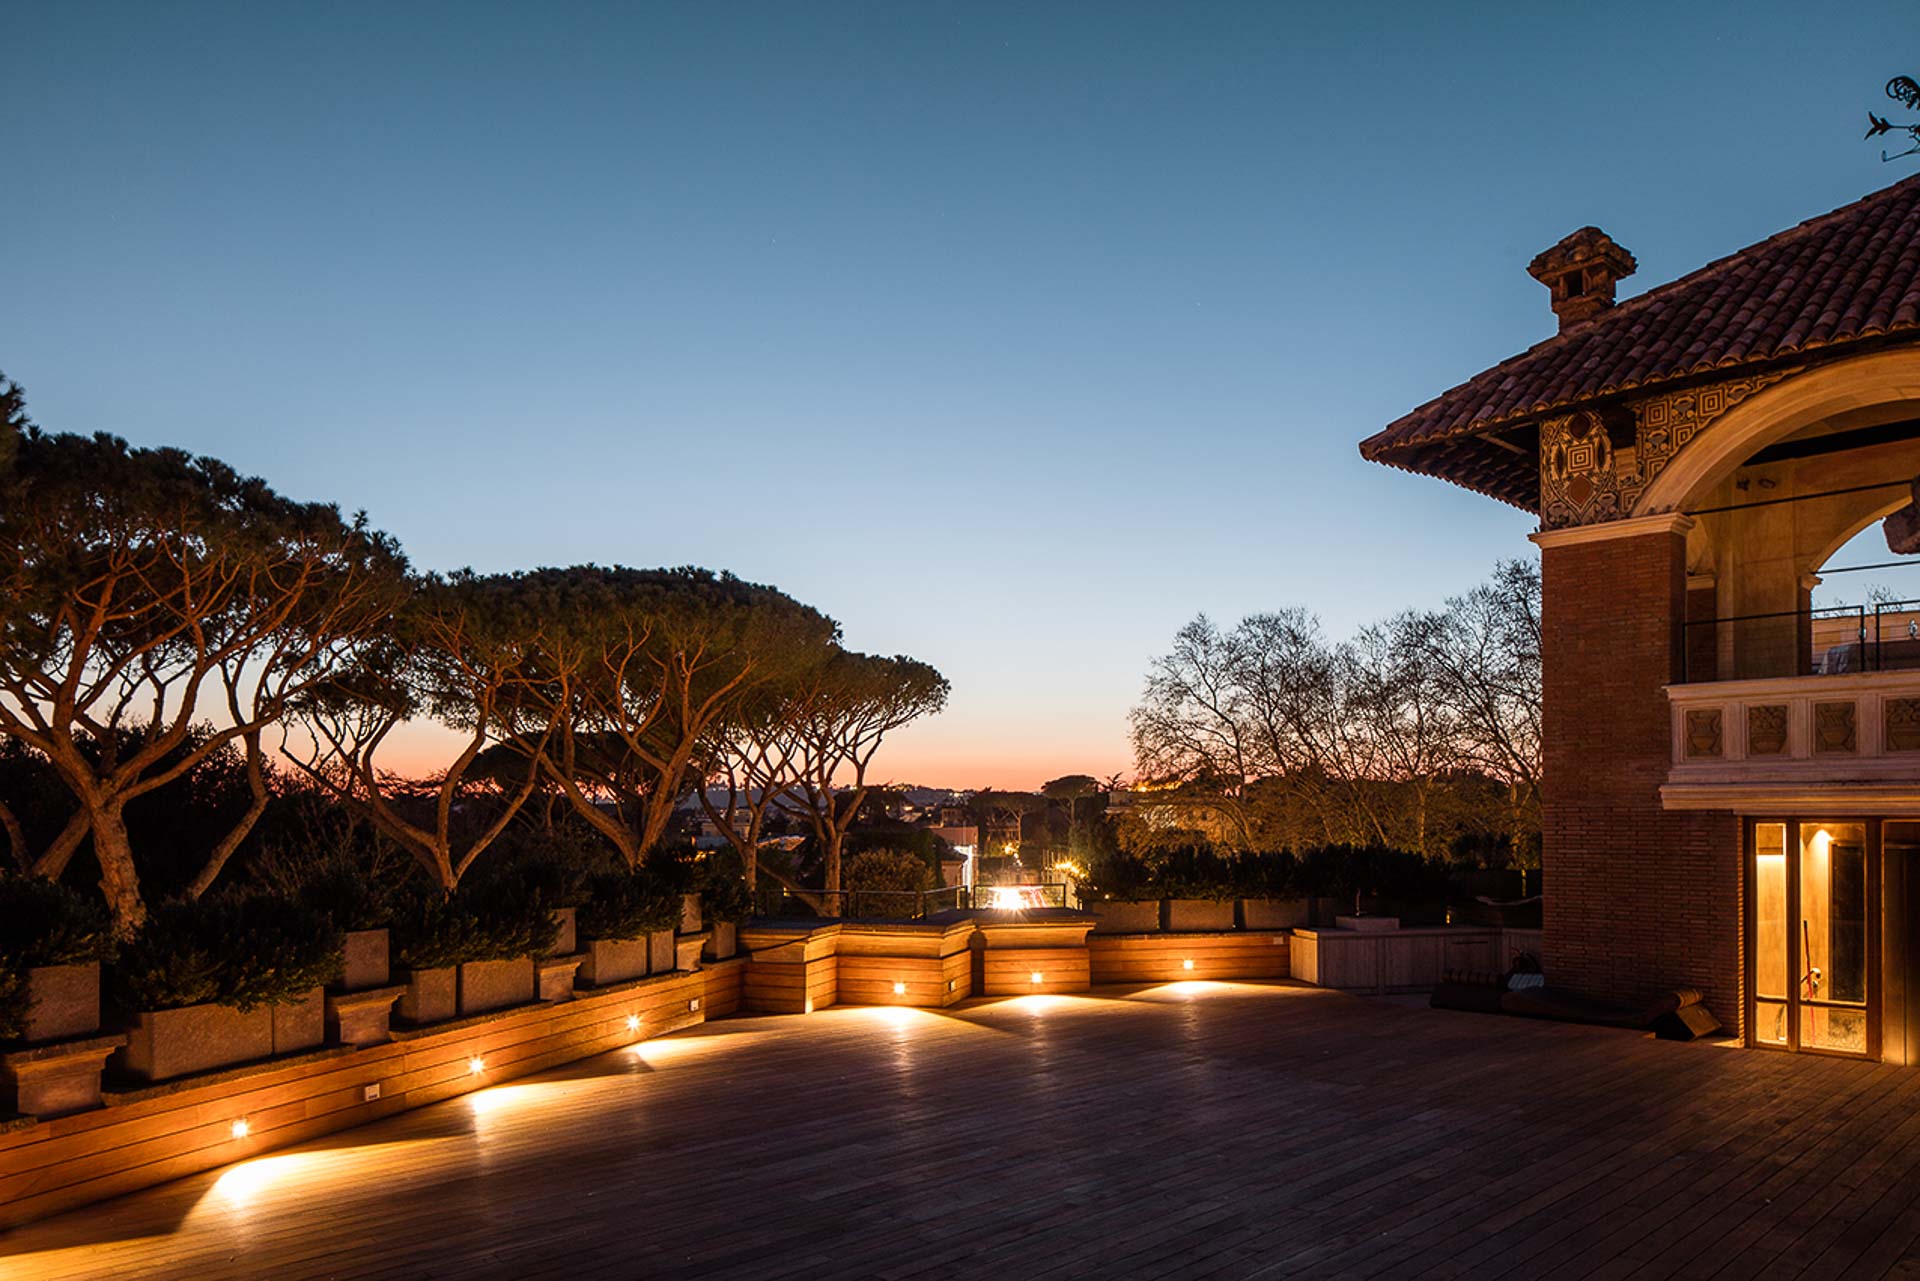 Villa Clara opulent property luxurious terrace guests enjoy 365 degree views of Rome available for rent exclusive events accommodation